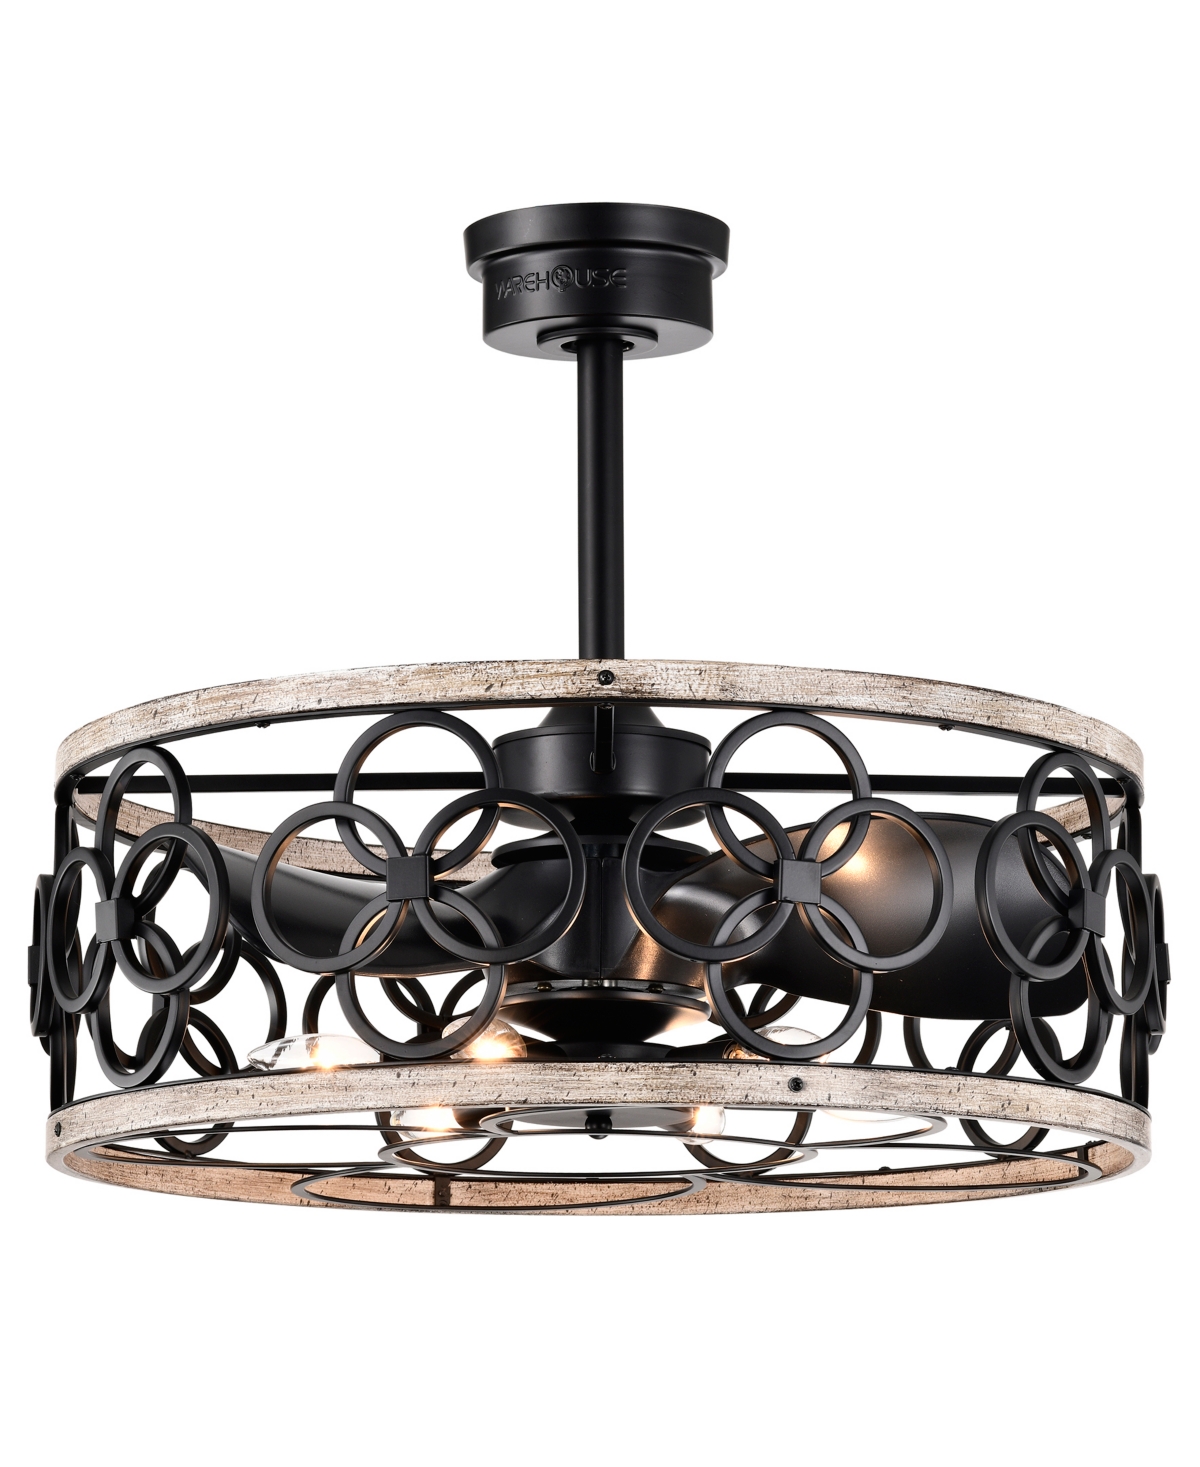 Home Accessories Luo 25" 6-light Indoor Finish Ceiling Fan With Light Kit In Matte Black And Faux Wood Grain